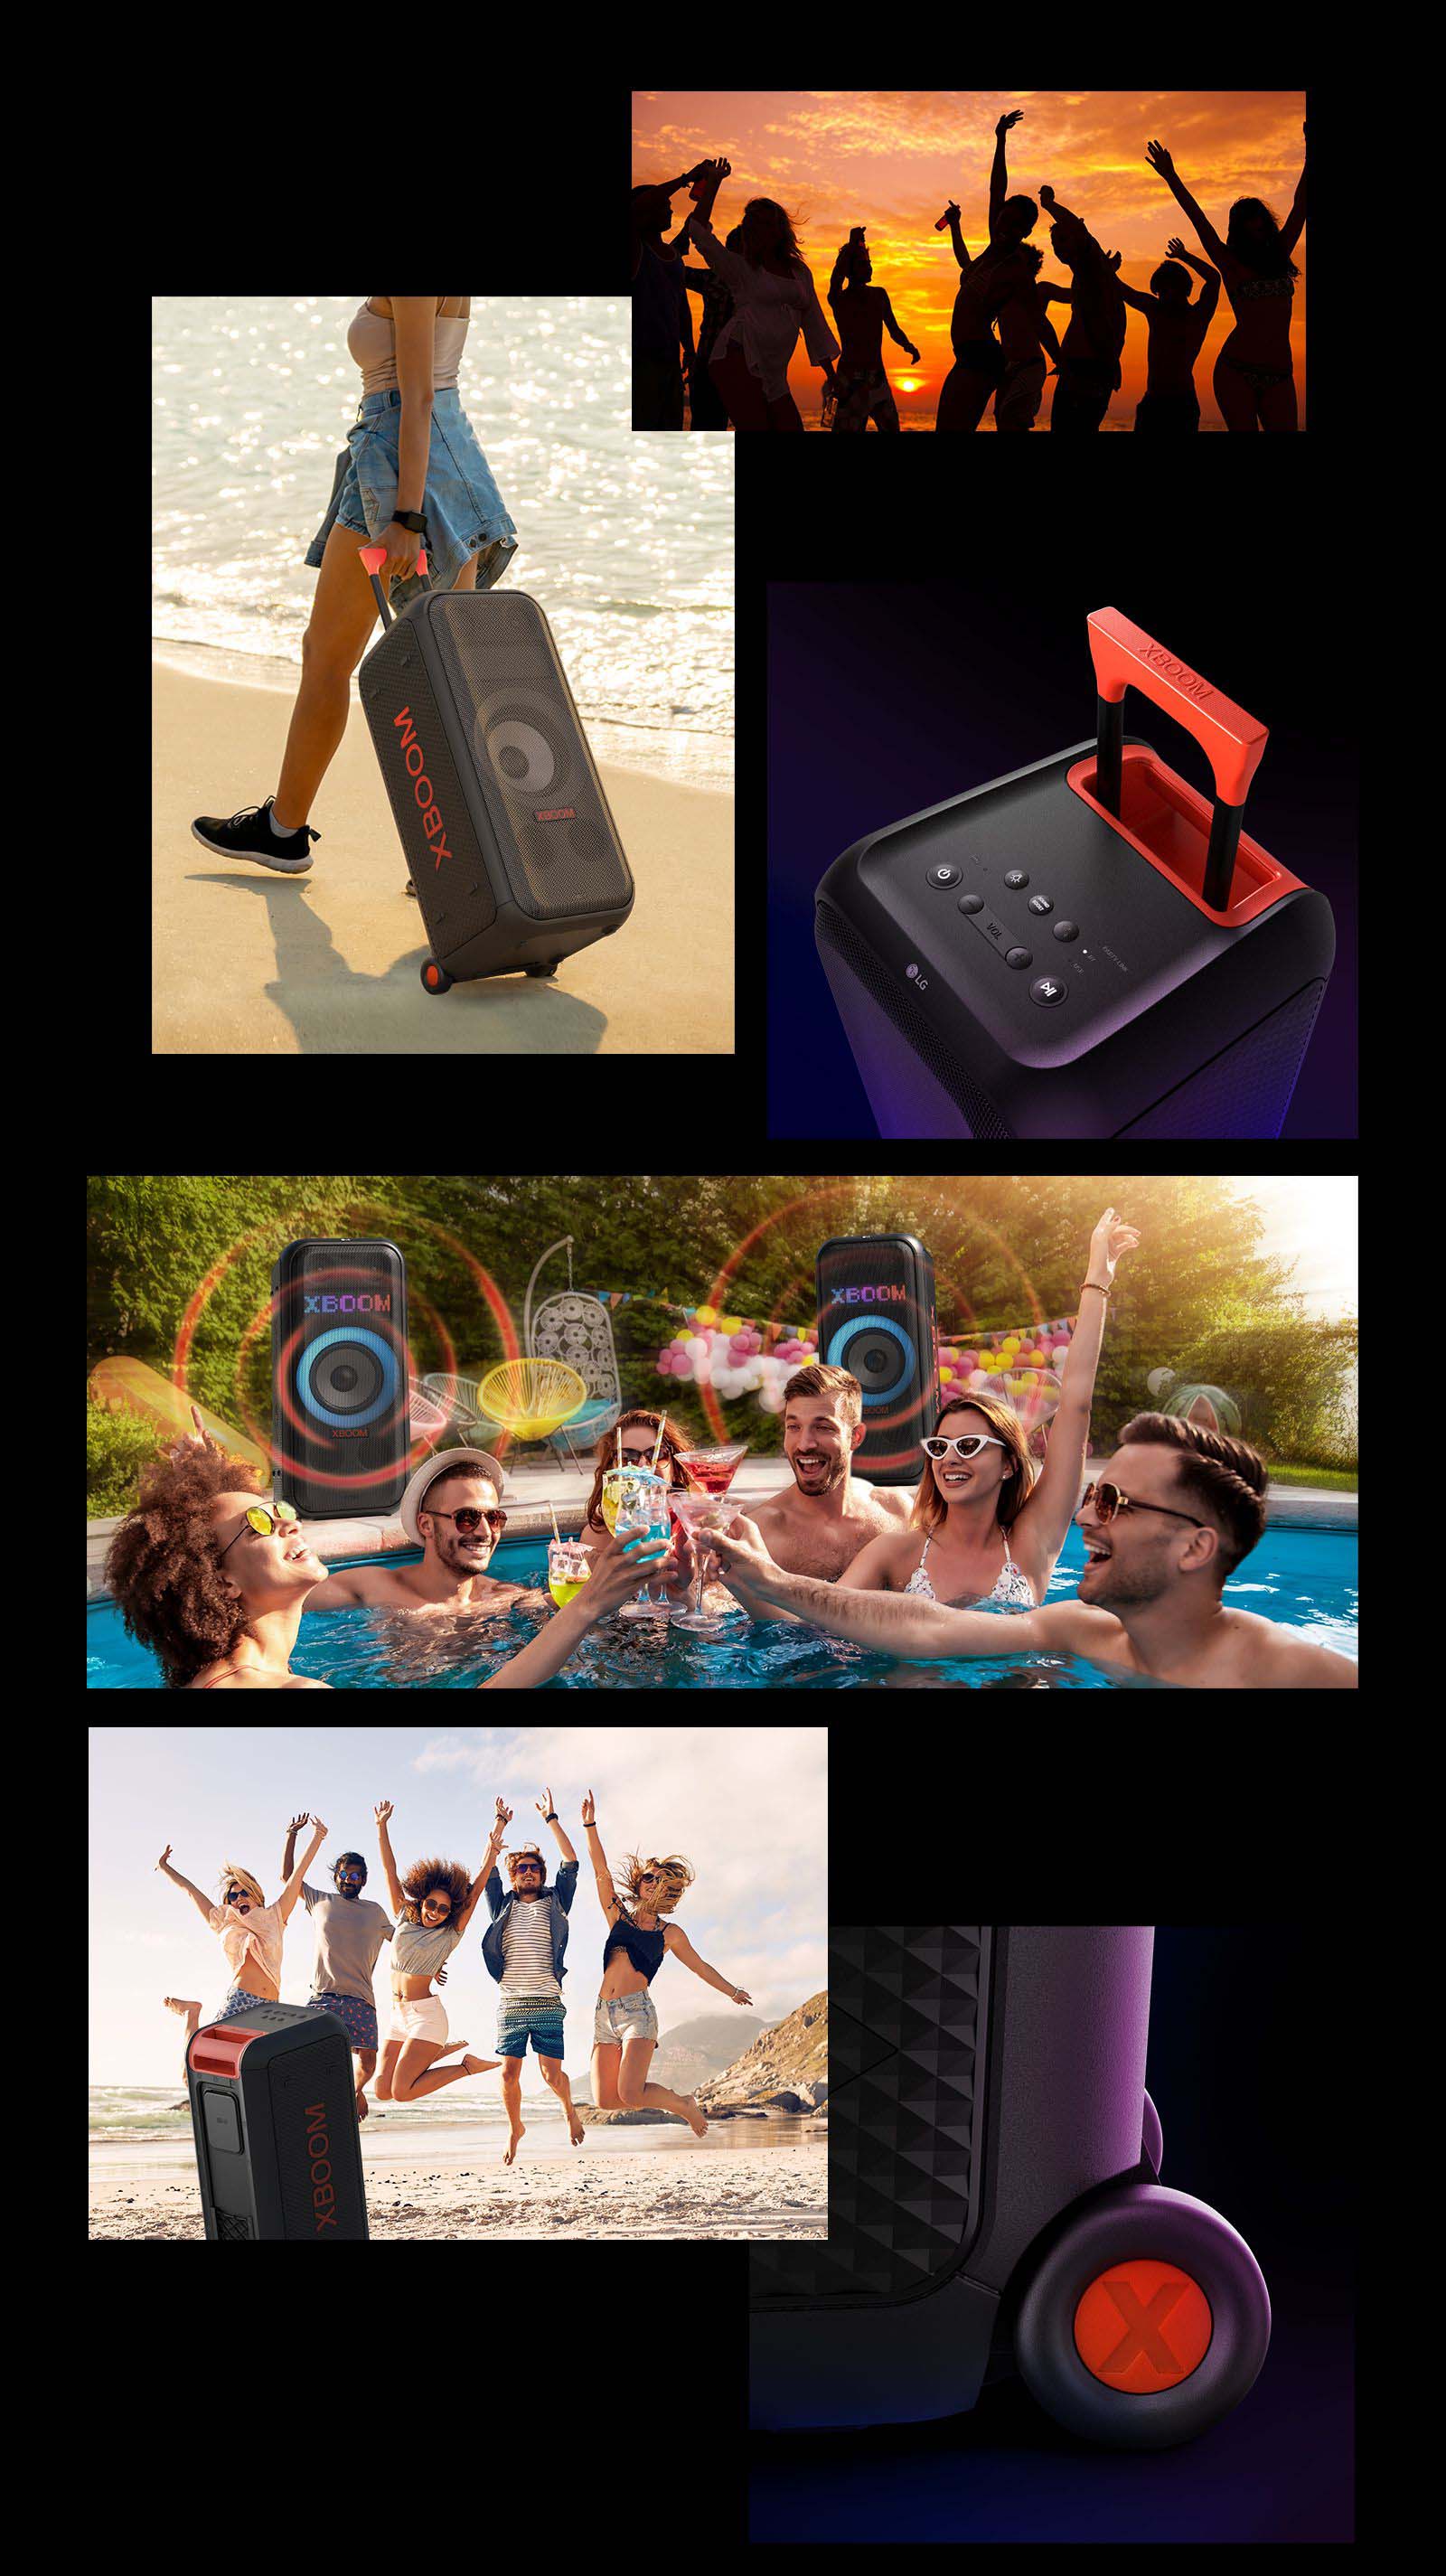 Illustrated images of LG XBOOM XL7S. From the top, shillouet of people, with the telescopic handle and wheels woman carrys the speaker easily. Top view of the speaker and telescopic handle. People are enjoying pool party, two LG XBOOM XL7S with sound graphics are placed behind. Back view of the speaker and people are juming on the beach, close-up of the wheel.